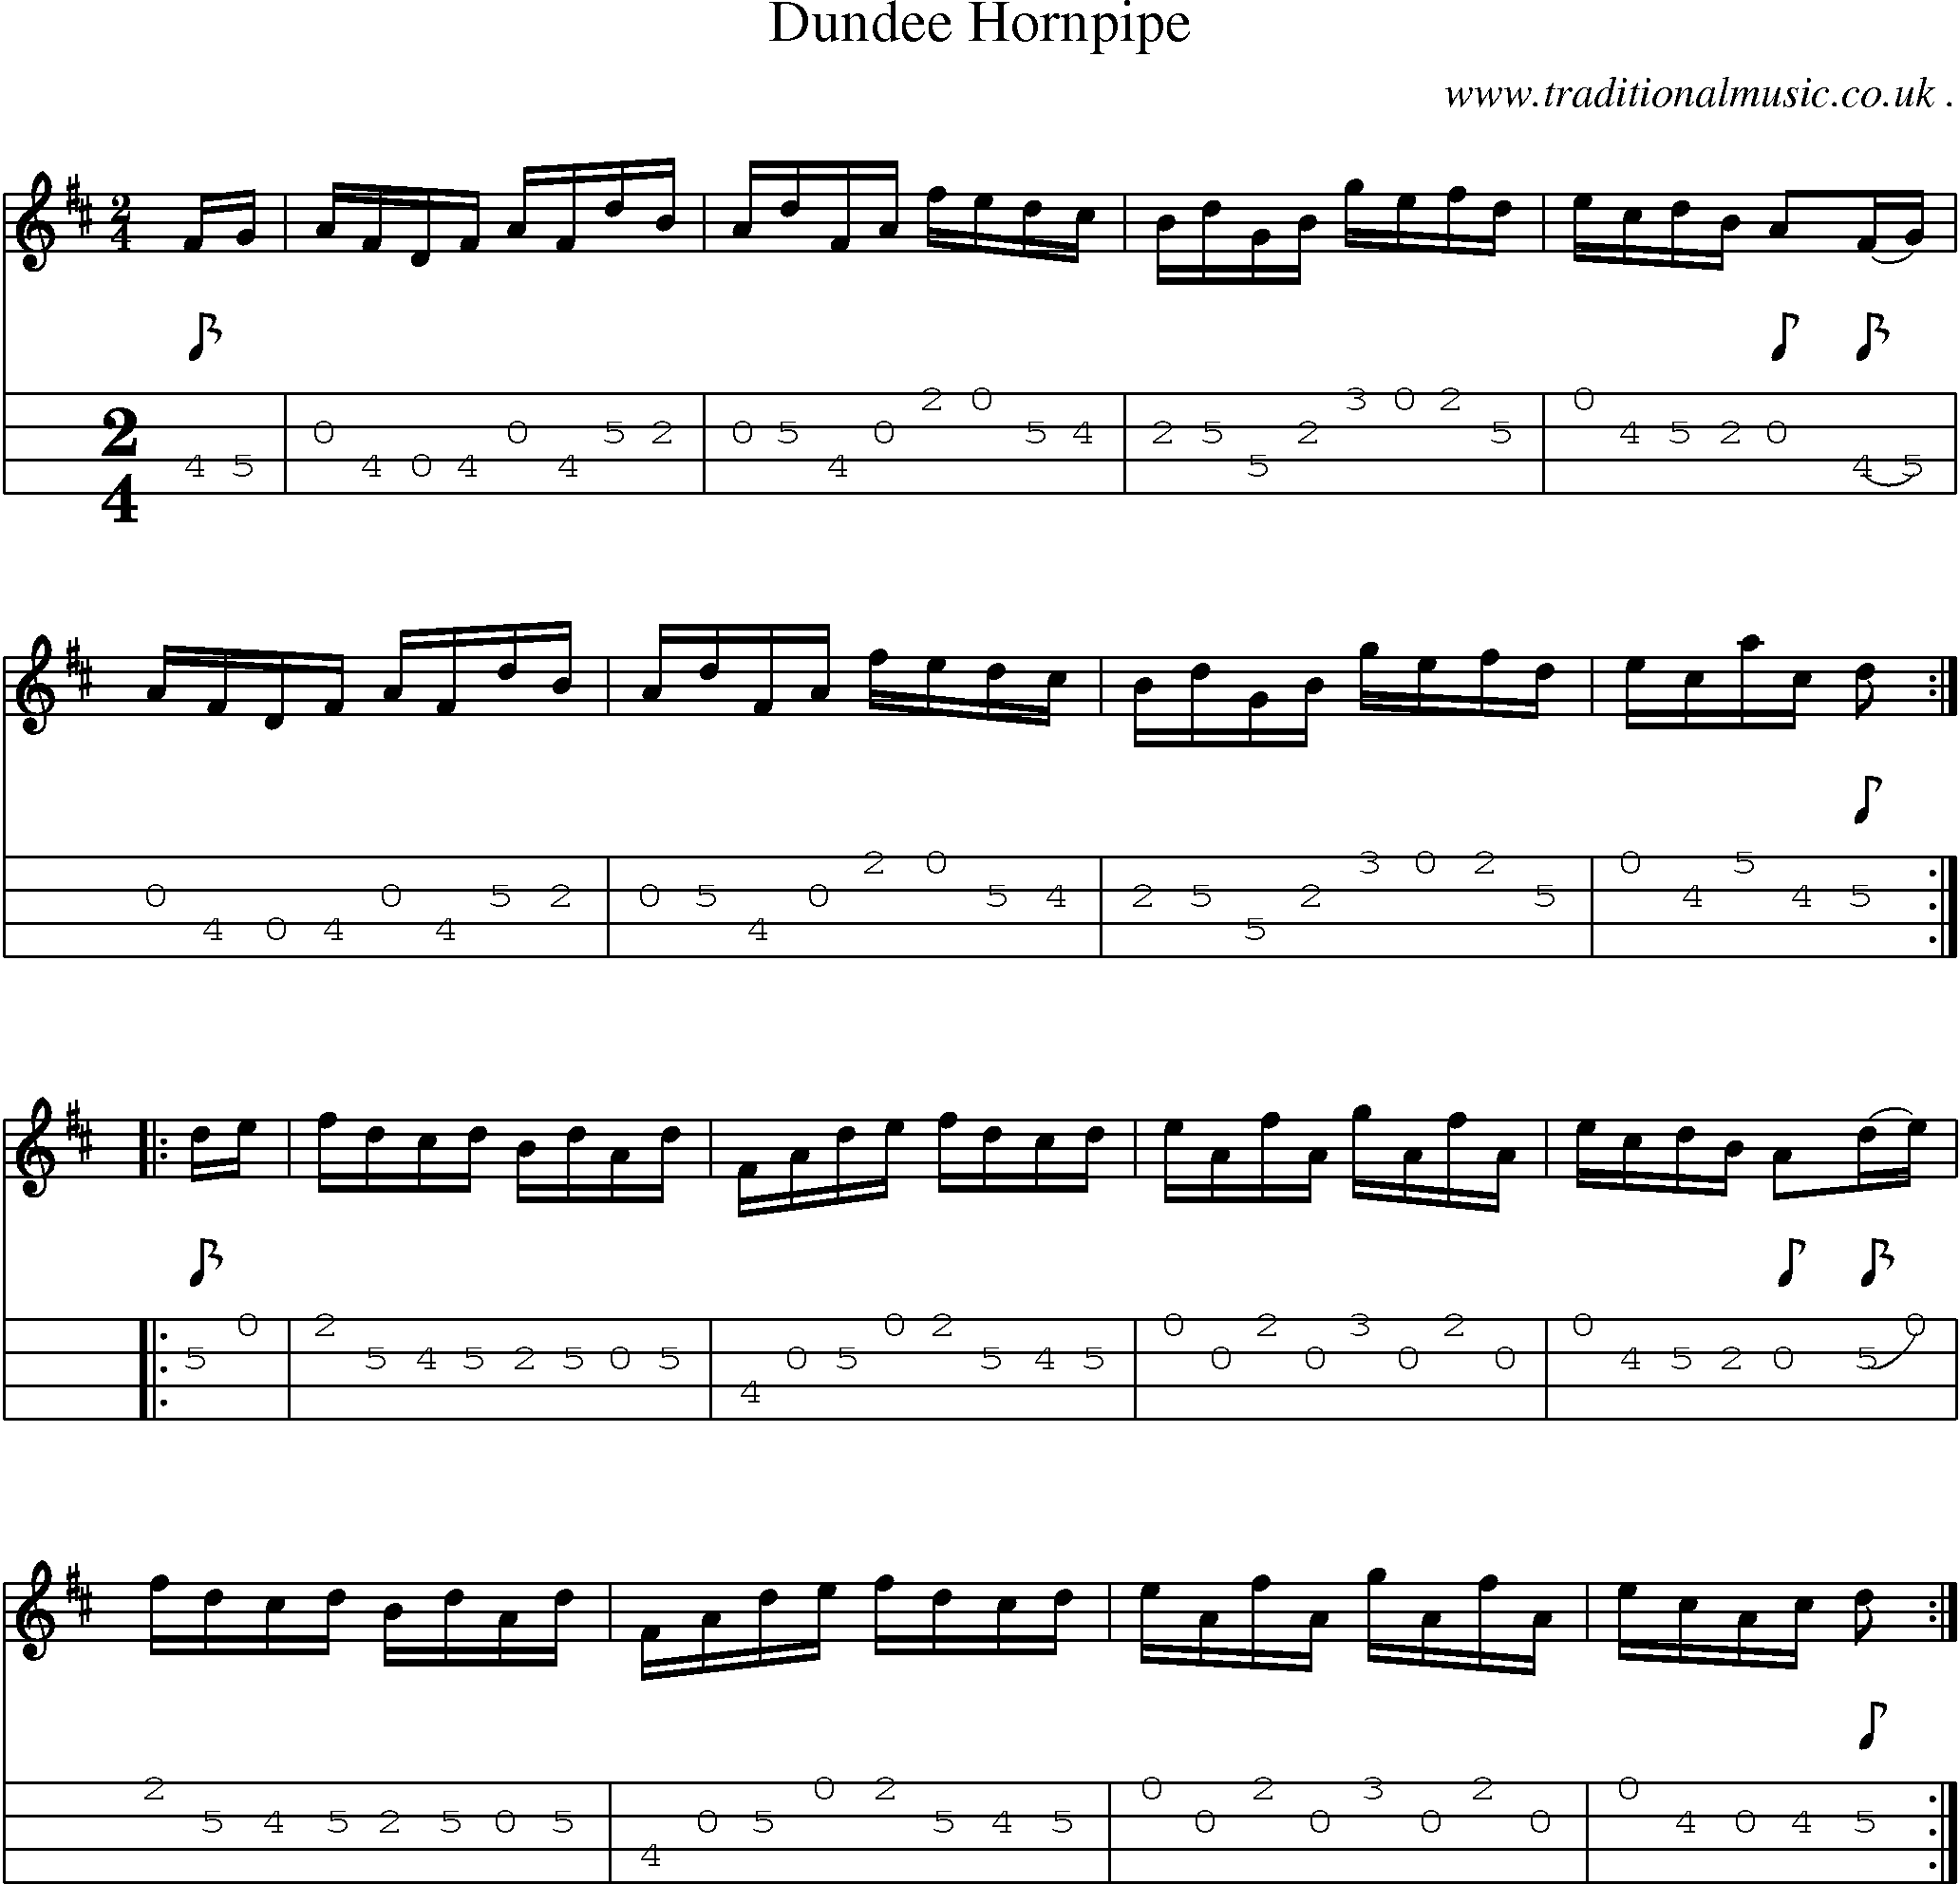 Sheet-Music and Mandolin Tabs for Dundee Hornpipe